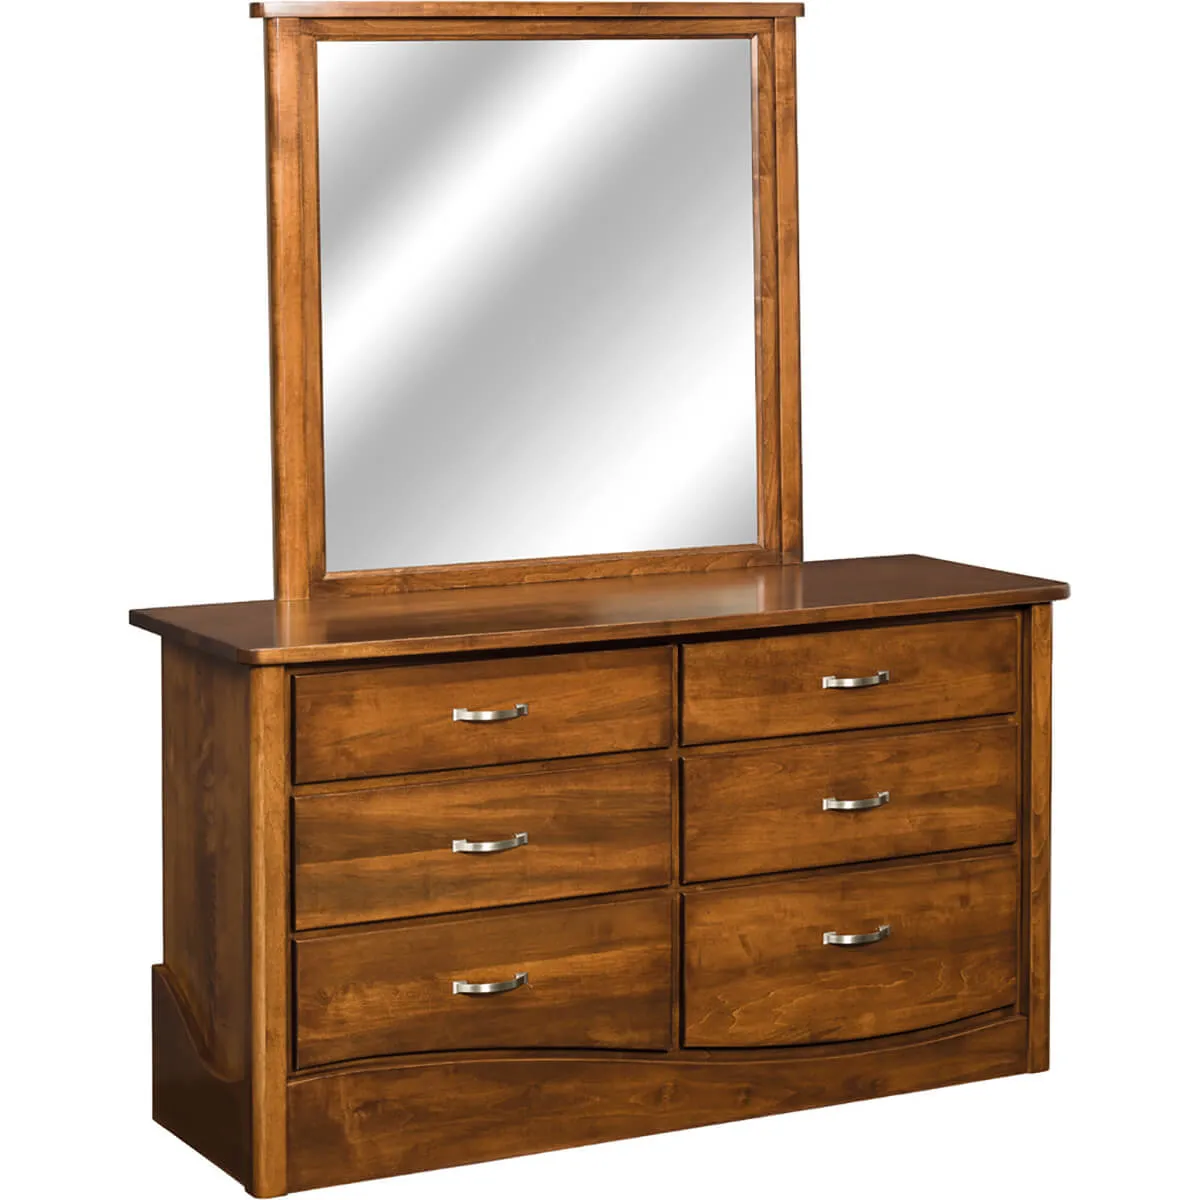 Tannessah Youth Dresser With Mirror